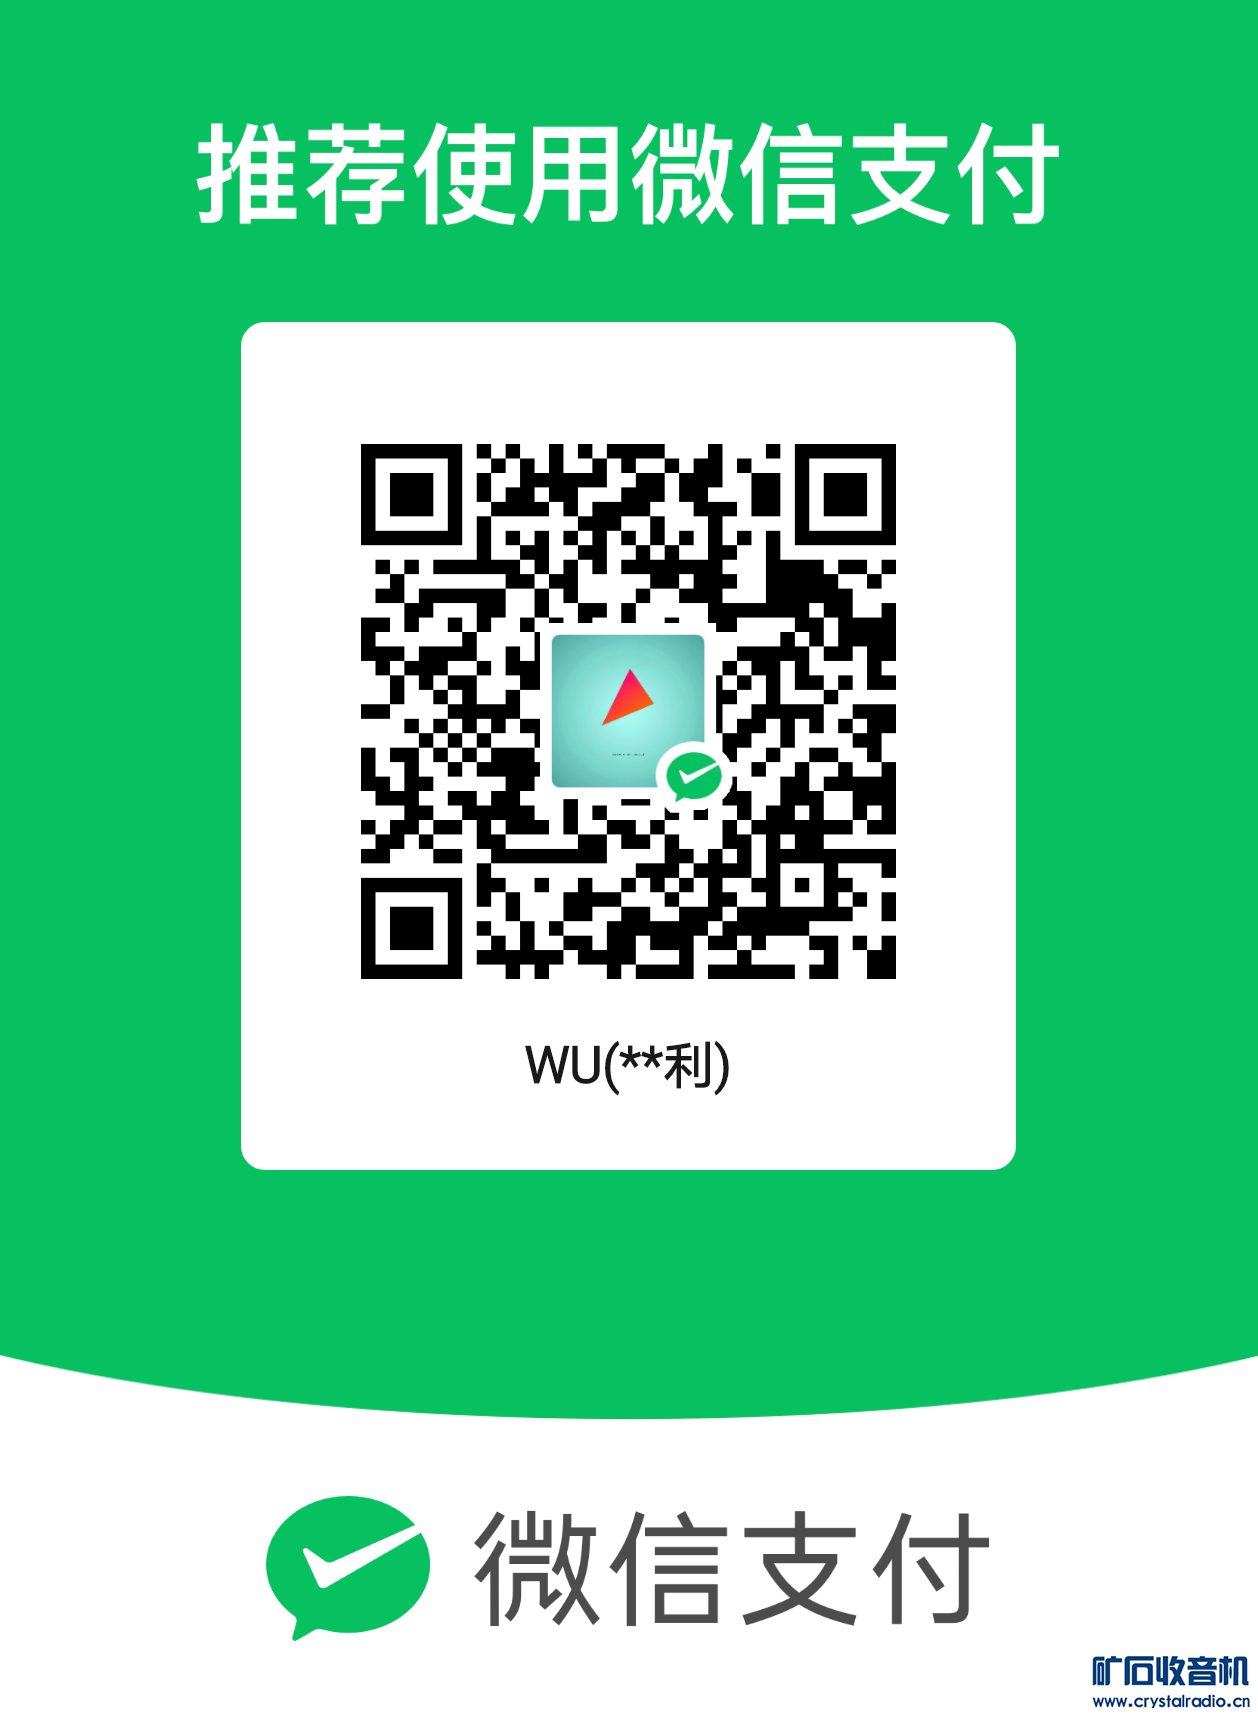 mm_facetoface_collect_qrcode_1710925893640.png